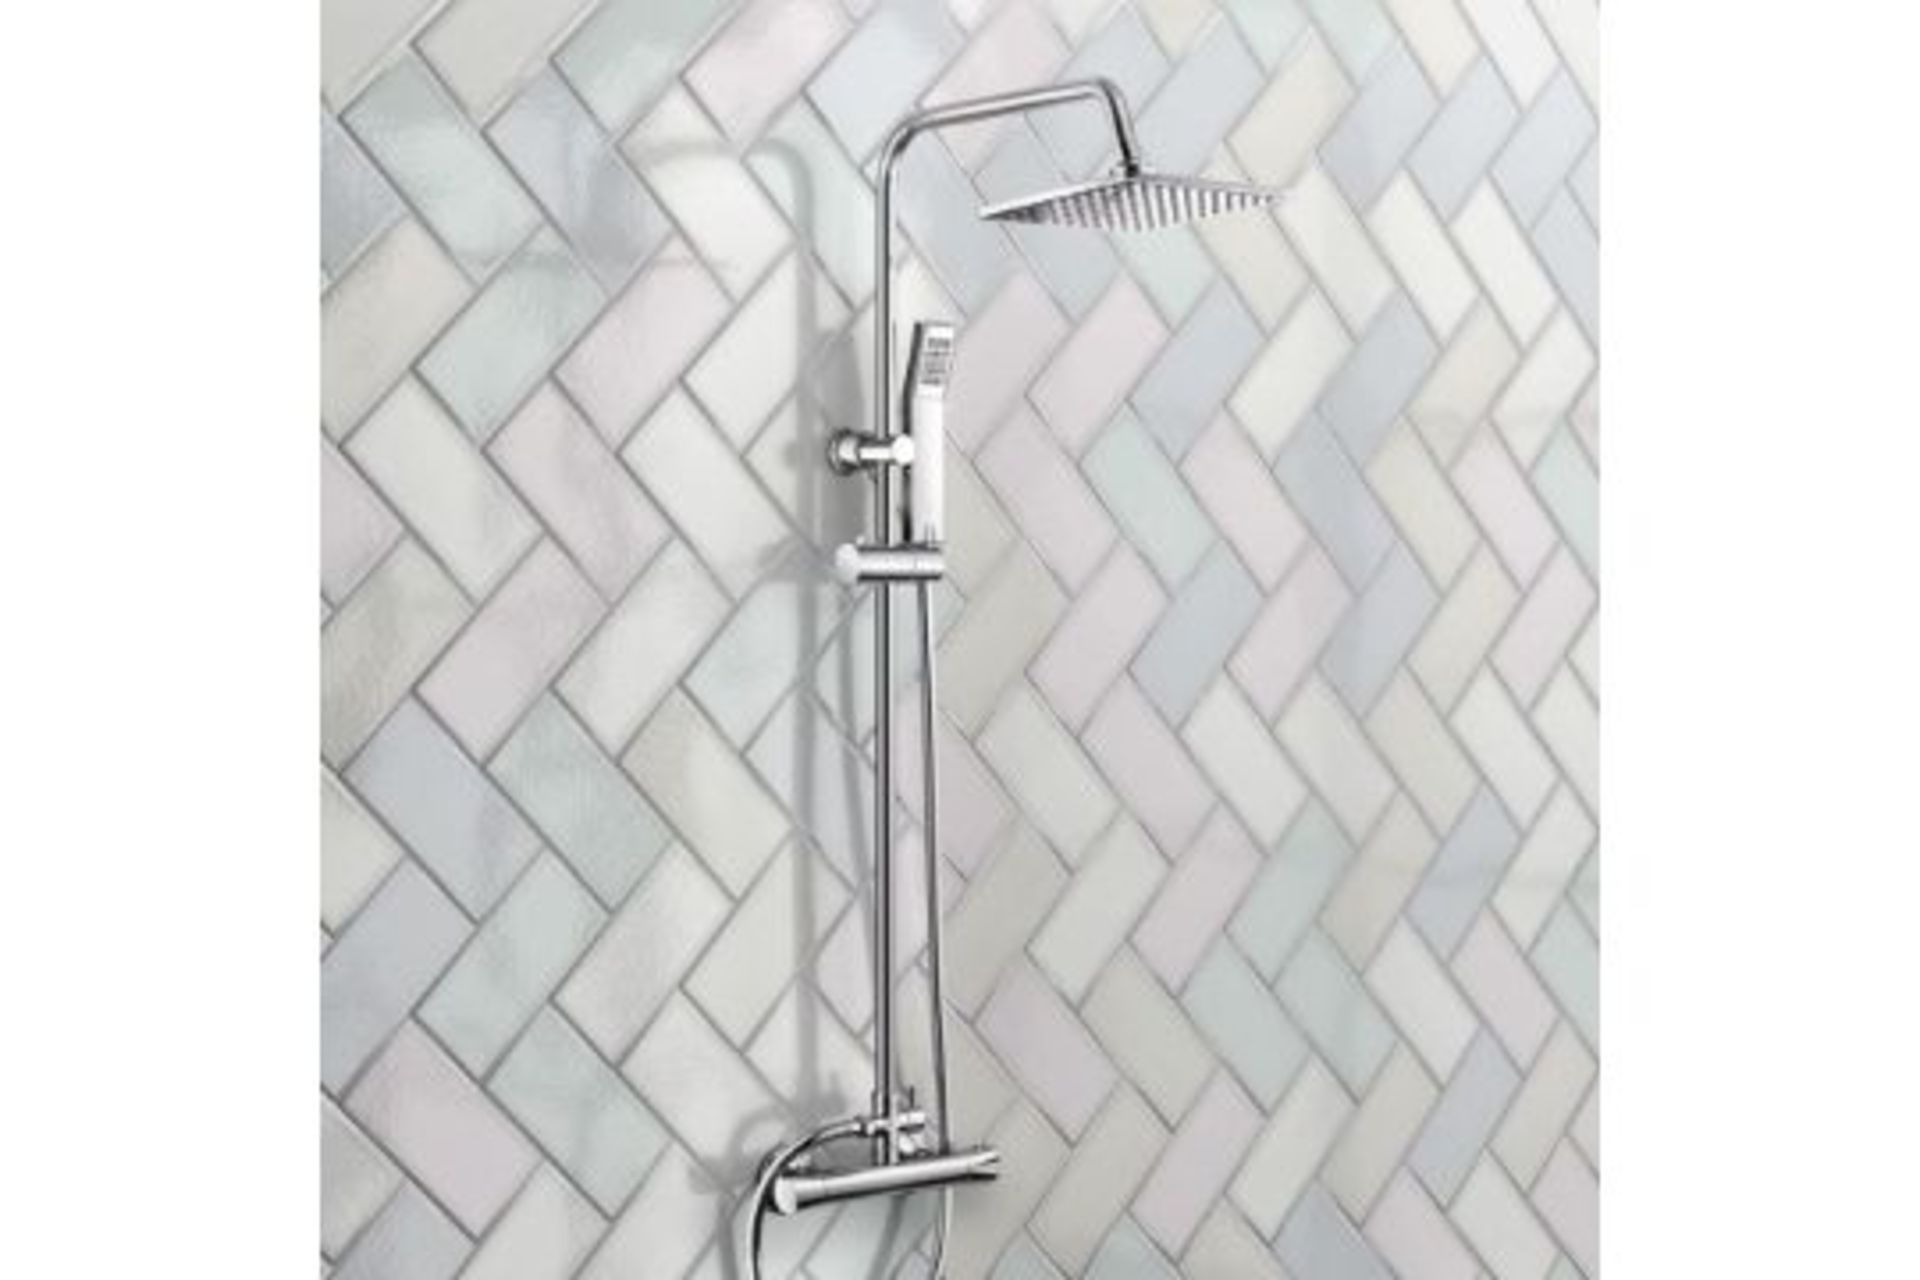 New & Boxed Exposed Thermostatic 2-Way Bar Mixer Shower Set Chrome Valve 200mm Square Head + Ha...